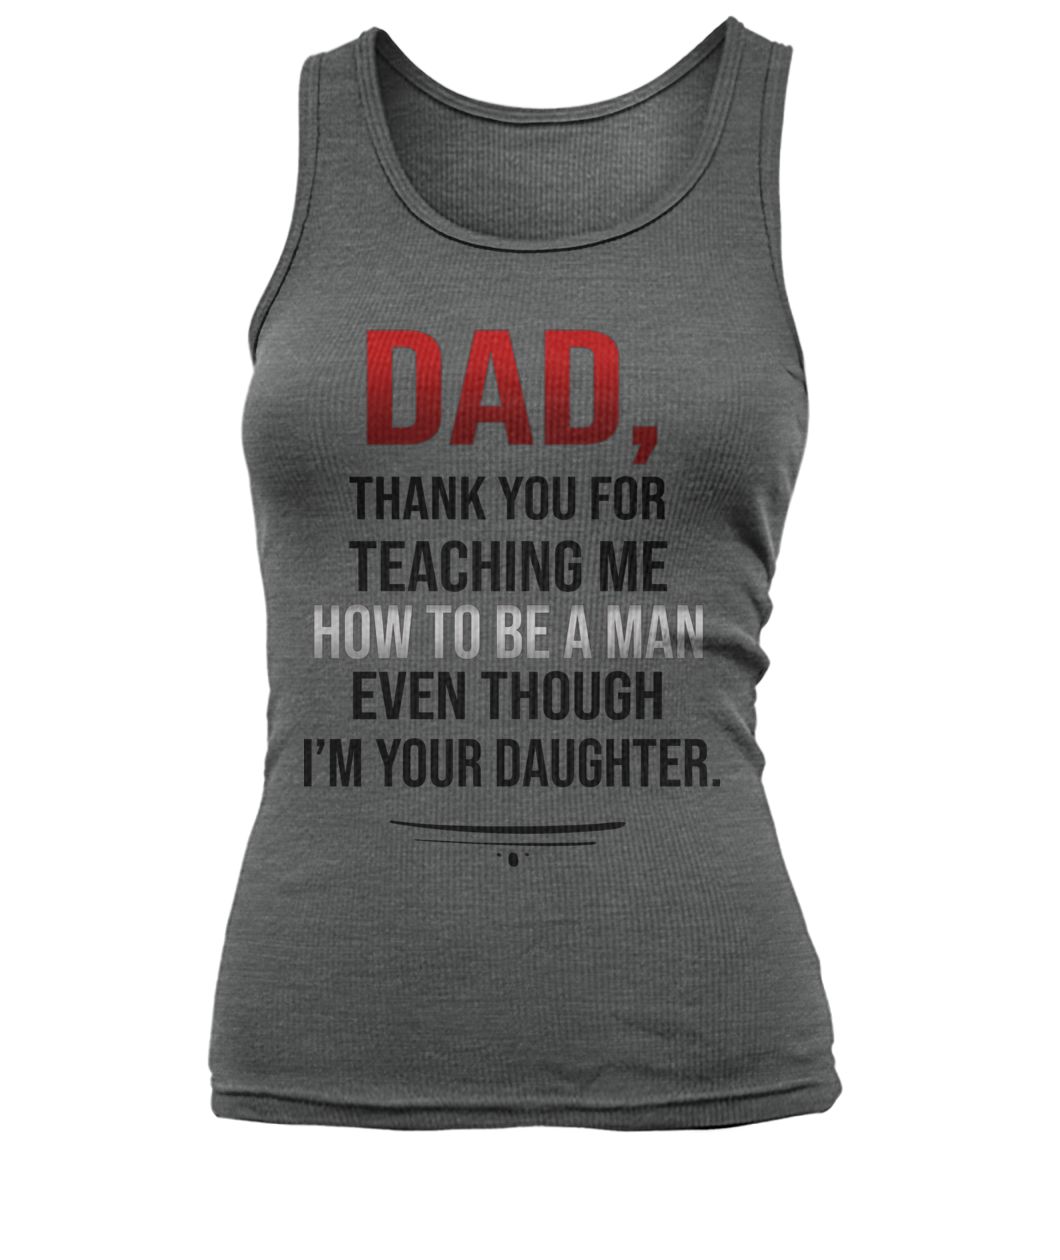 Dad thank you for teaching me how to be a man even though I’m your daughter women's tank top